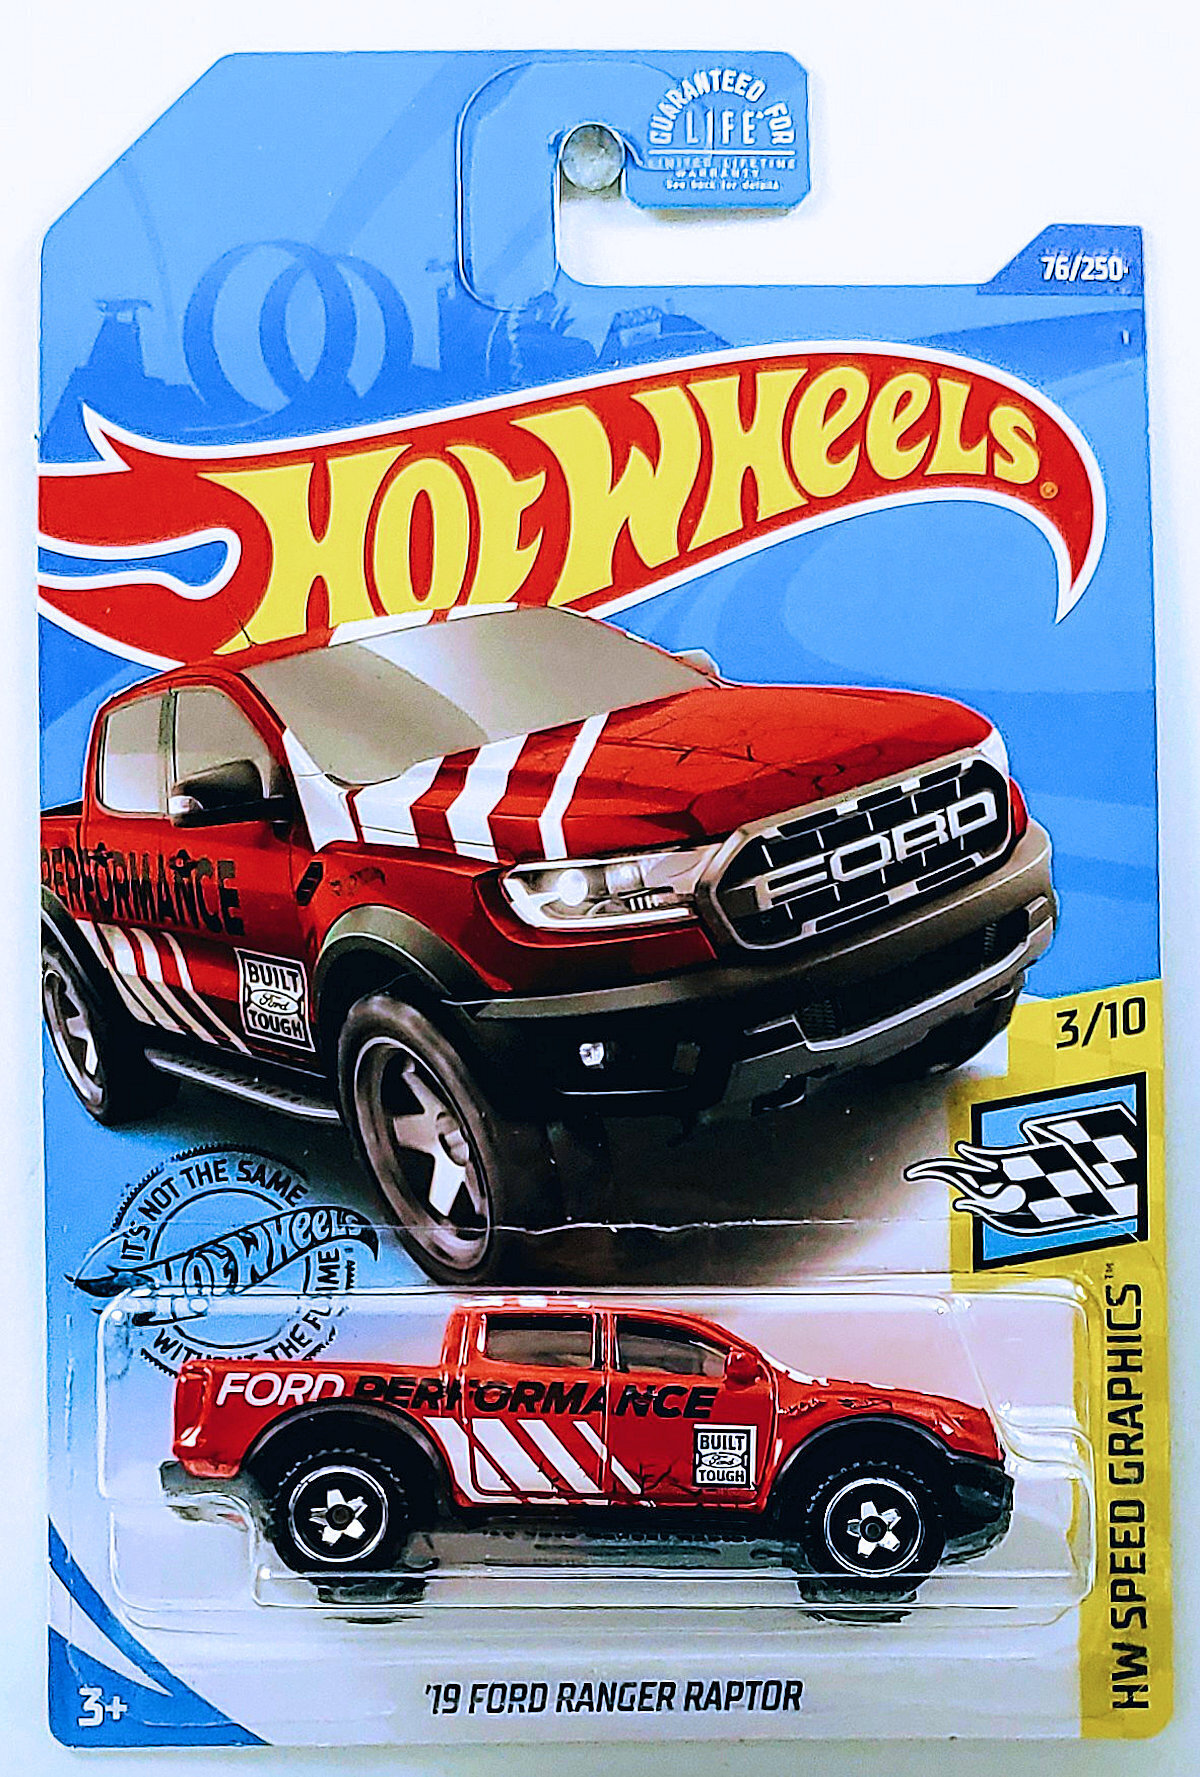 Details about   2020 Hot Wheels '19 Ford Ranger Raptor White 76/250 HW Speed Graphics #3 GHC85 